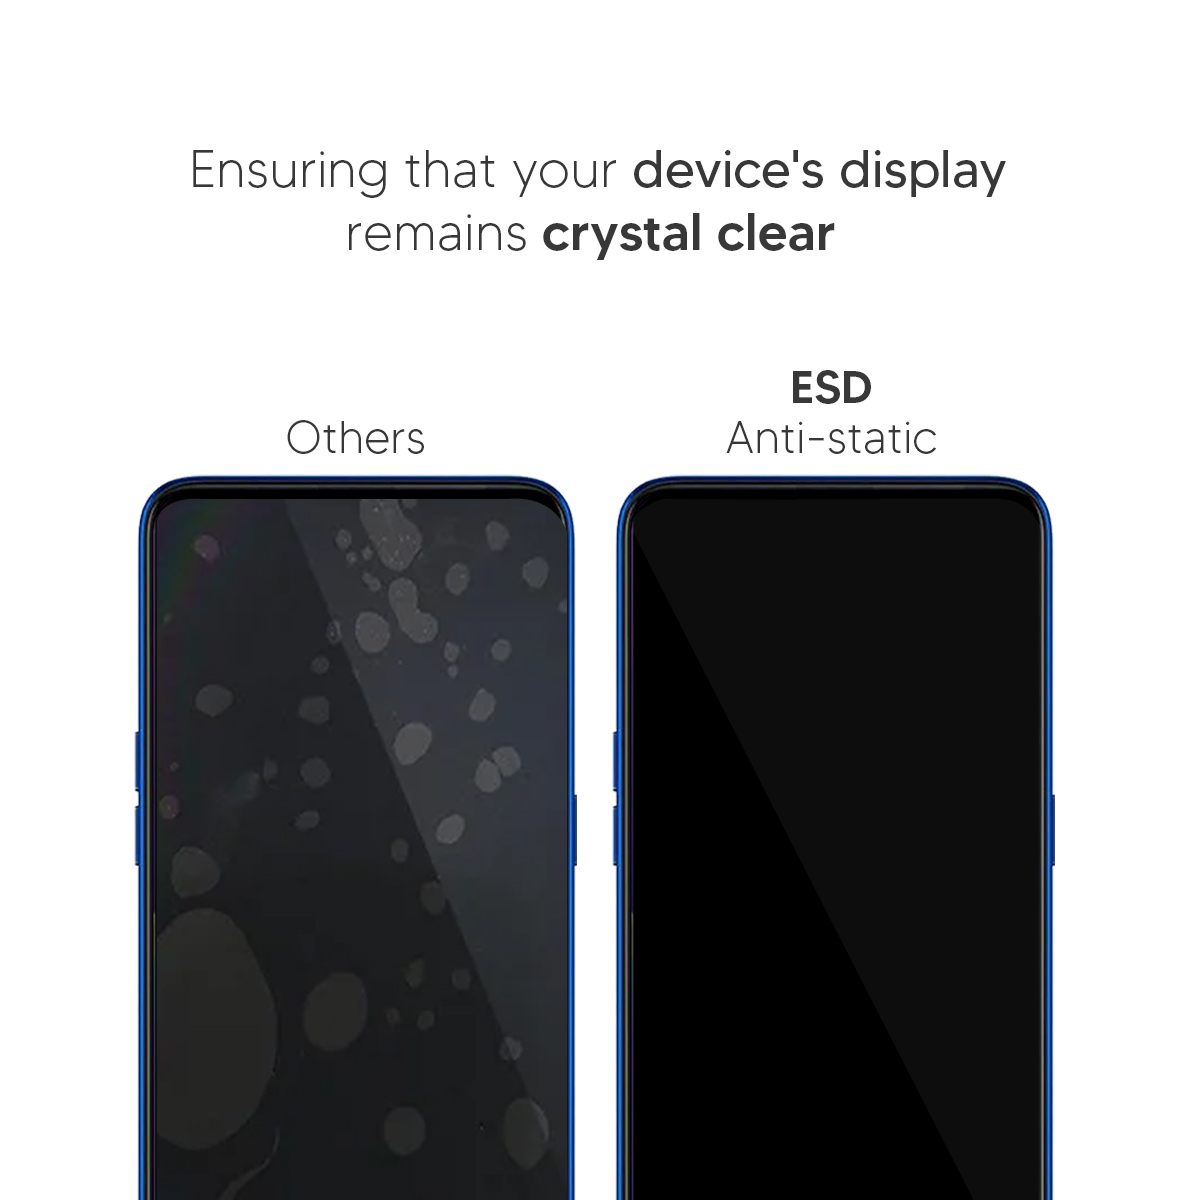 Beyox ESD Anti Static 5D Glass for Realme C2s